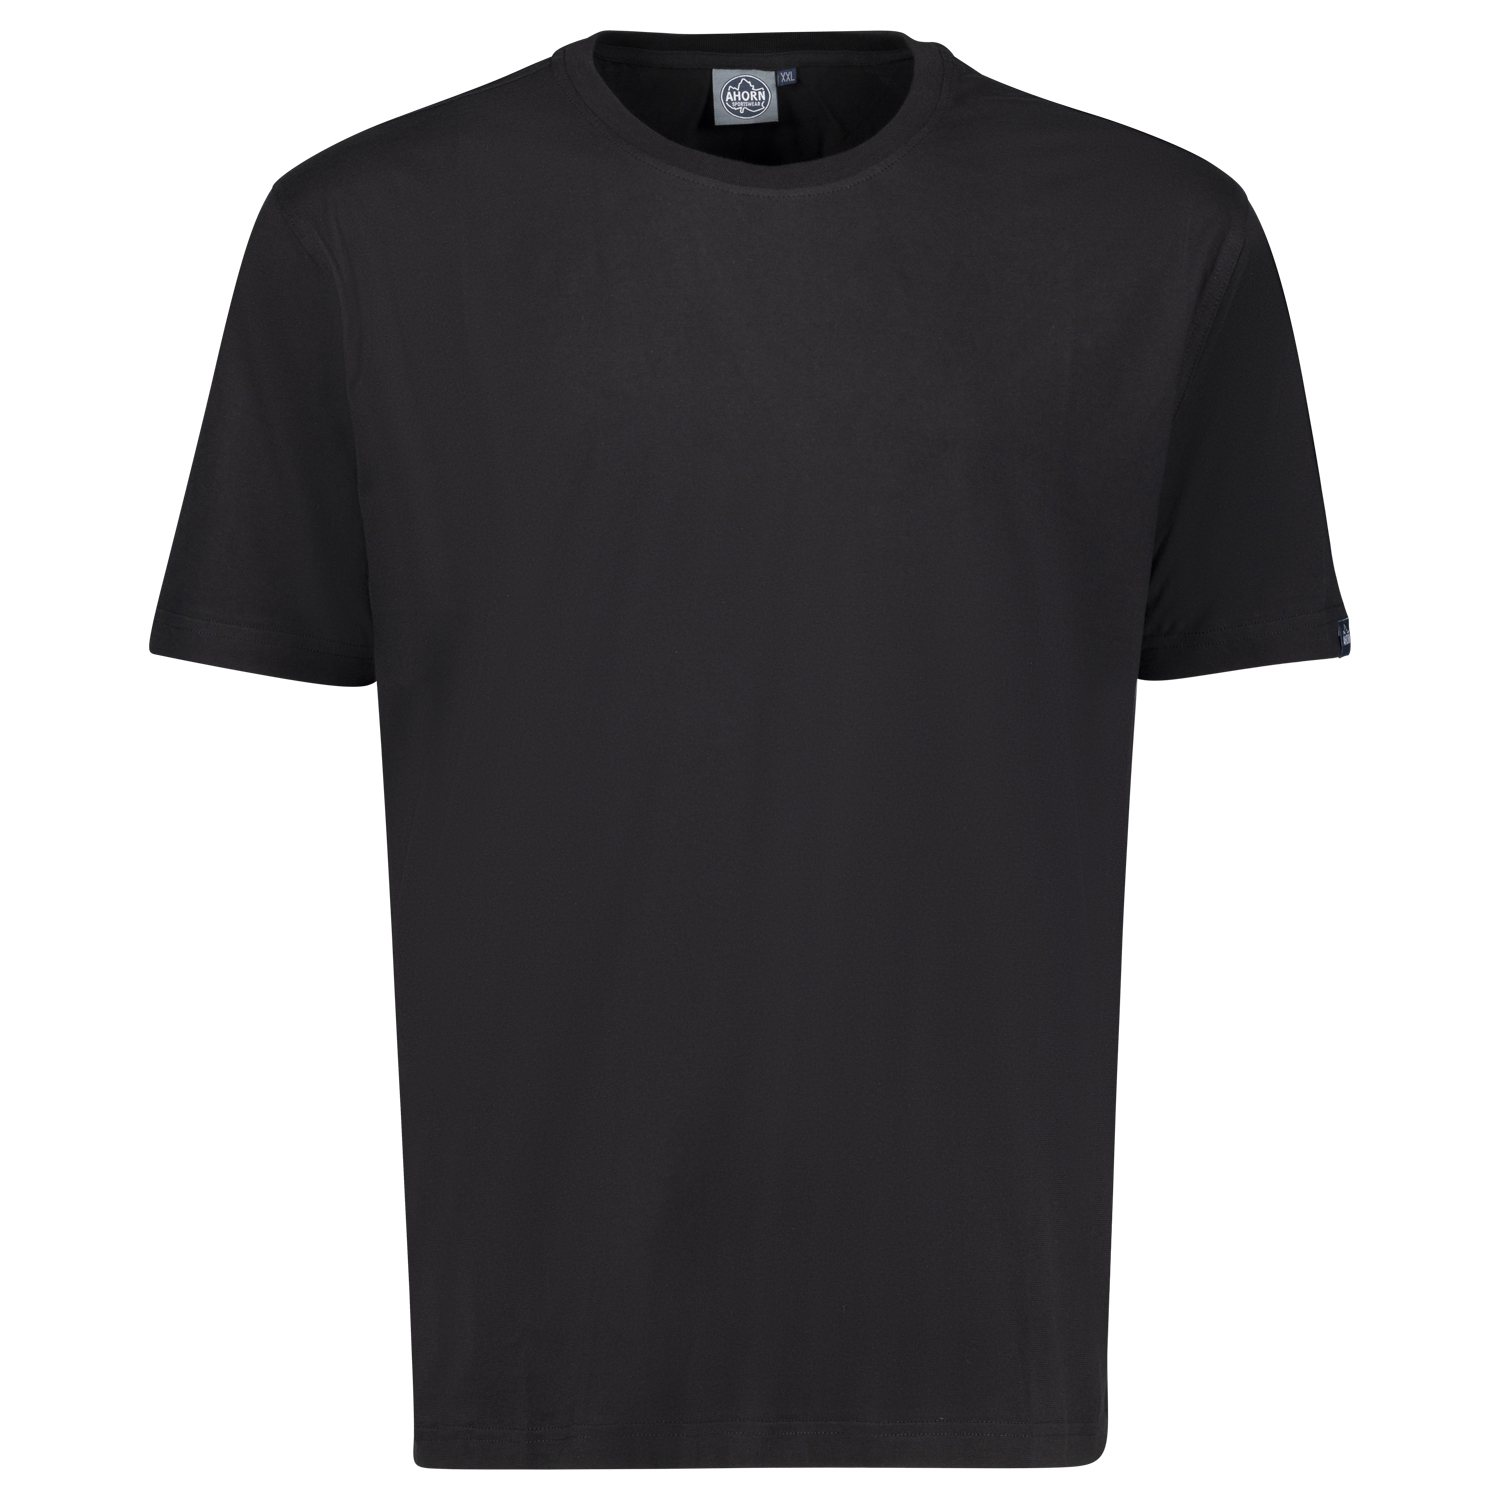 T-shirt with round neck in black by Ahorn Sportswear in extra large sizes up to 10XL